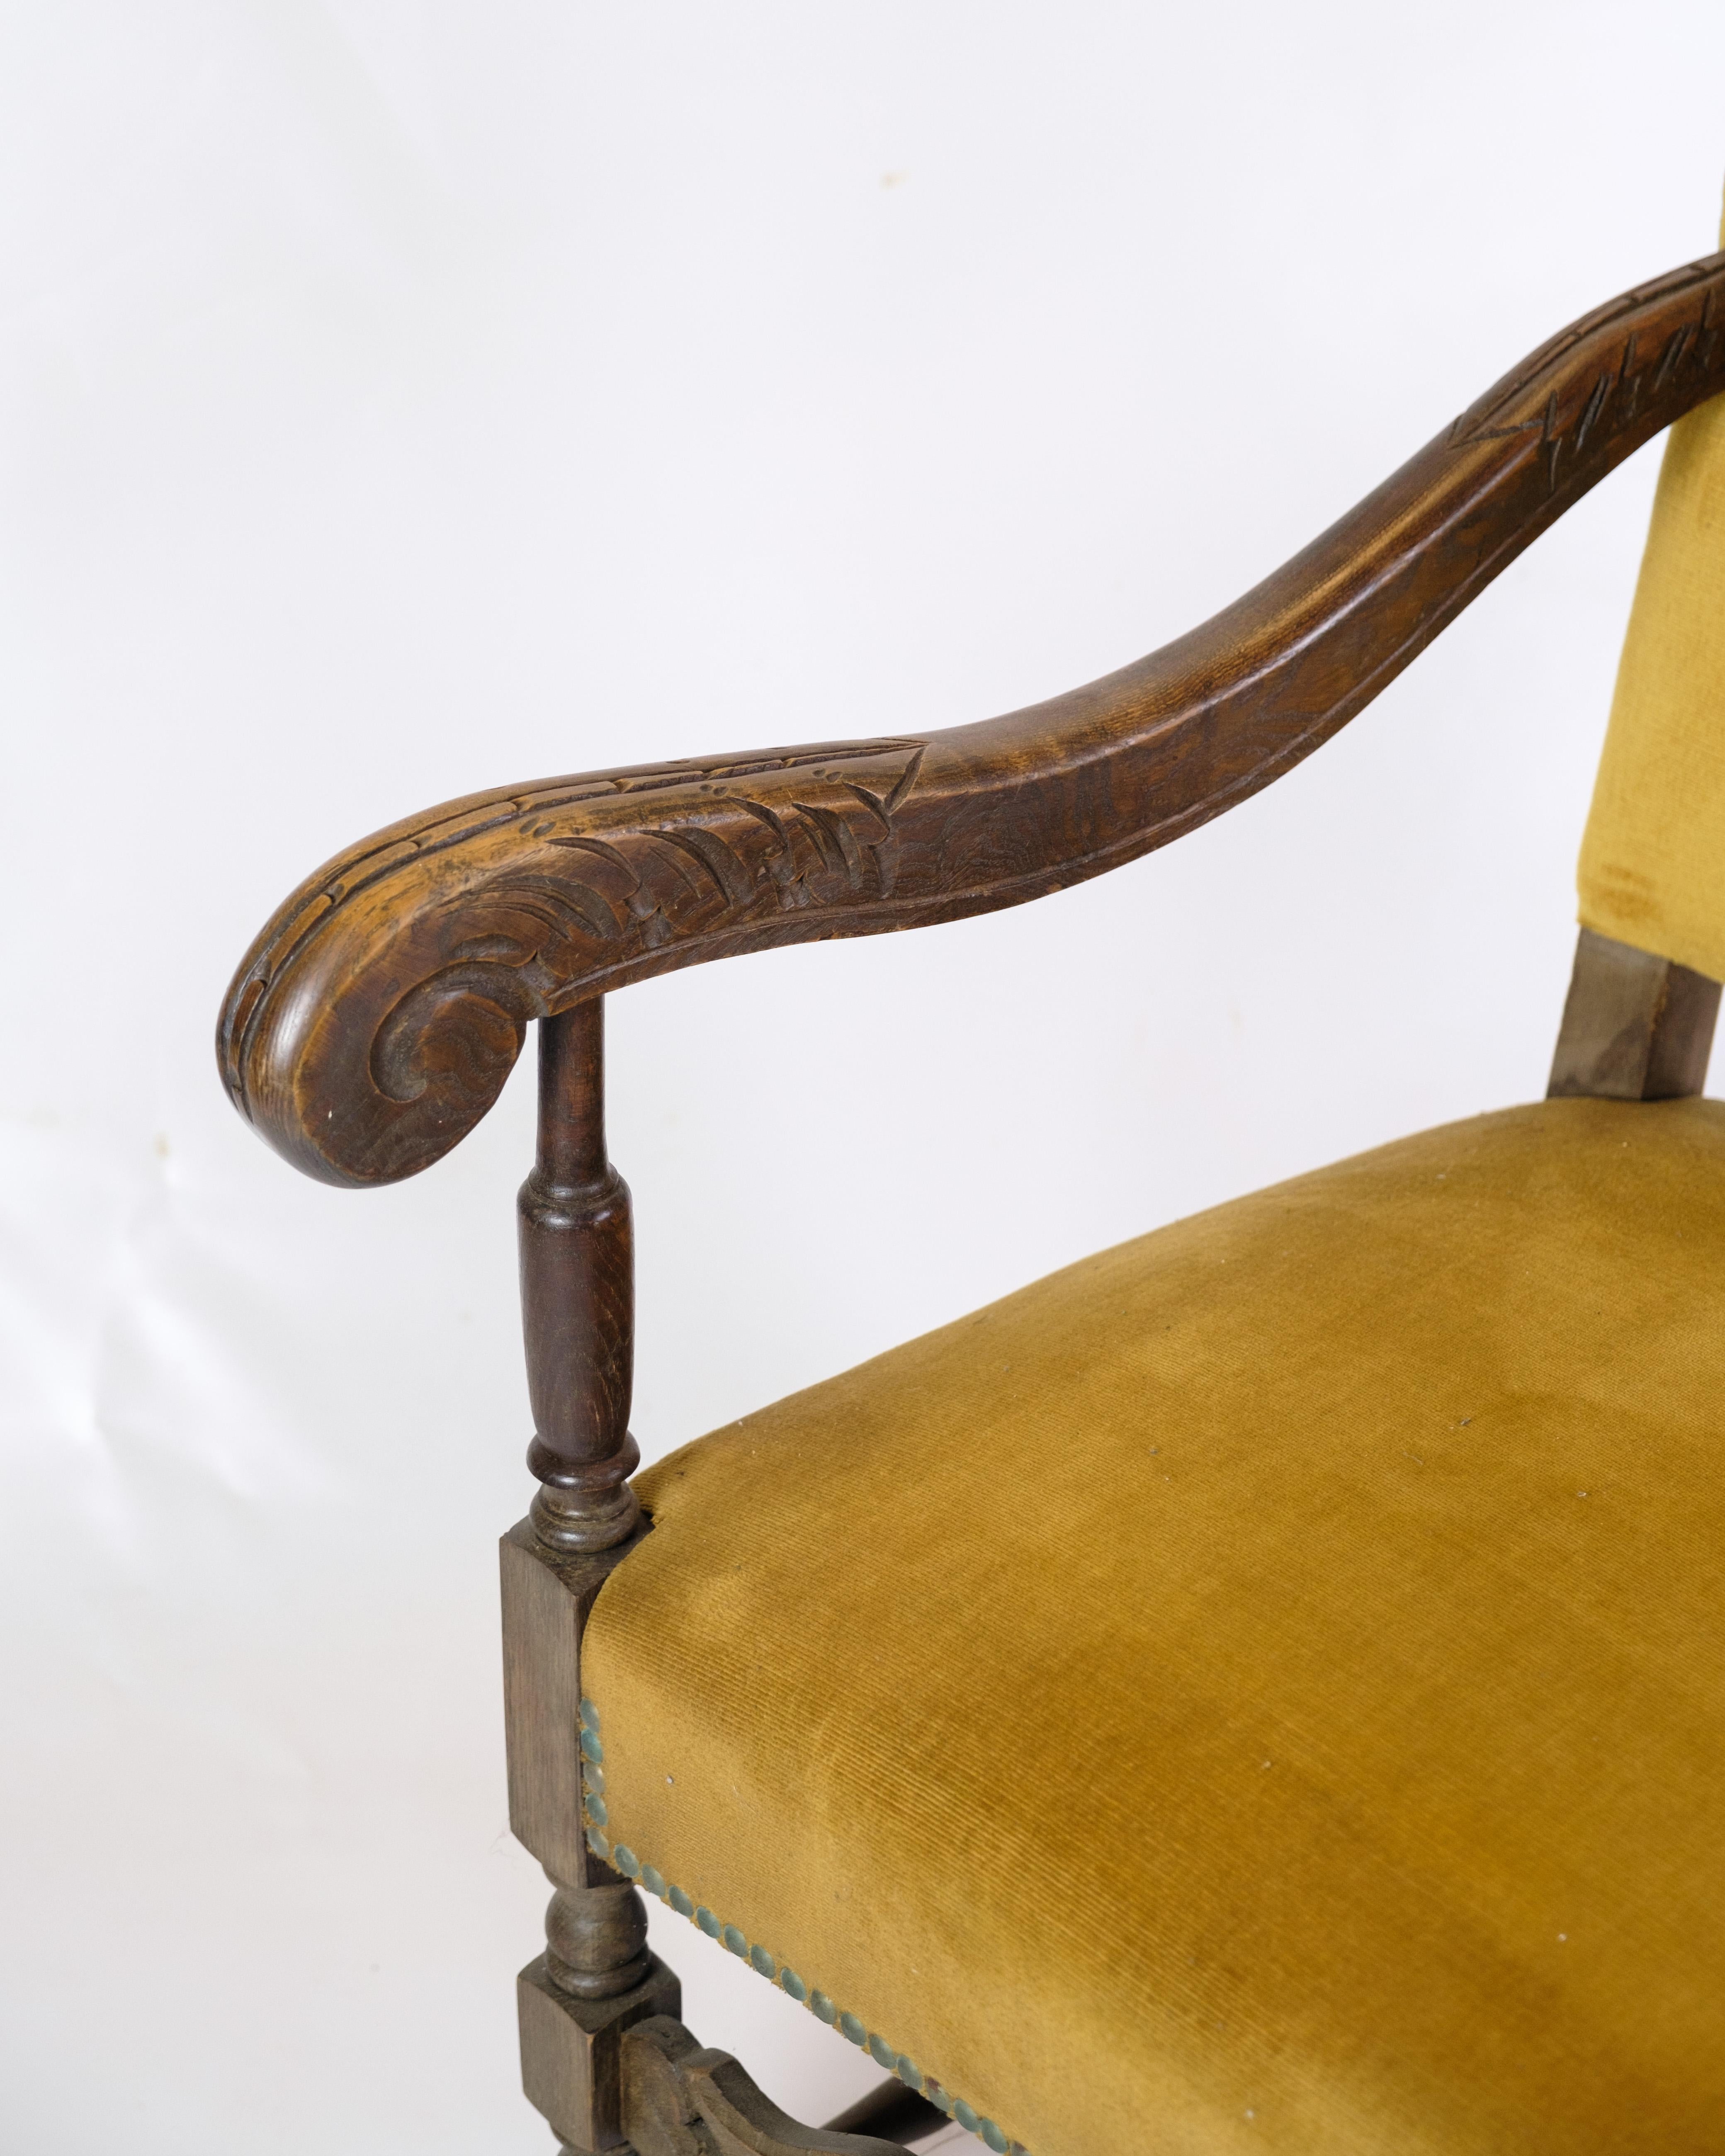 This antique king chair is a breathtaking representation of furniture history from the 1920s. Upholstered in yellow stitched velor, this chair exudes a regal elegance and a finesse typical of the period.

The most striking feature of this chair is